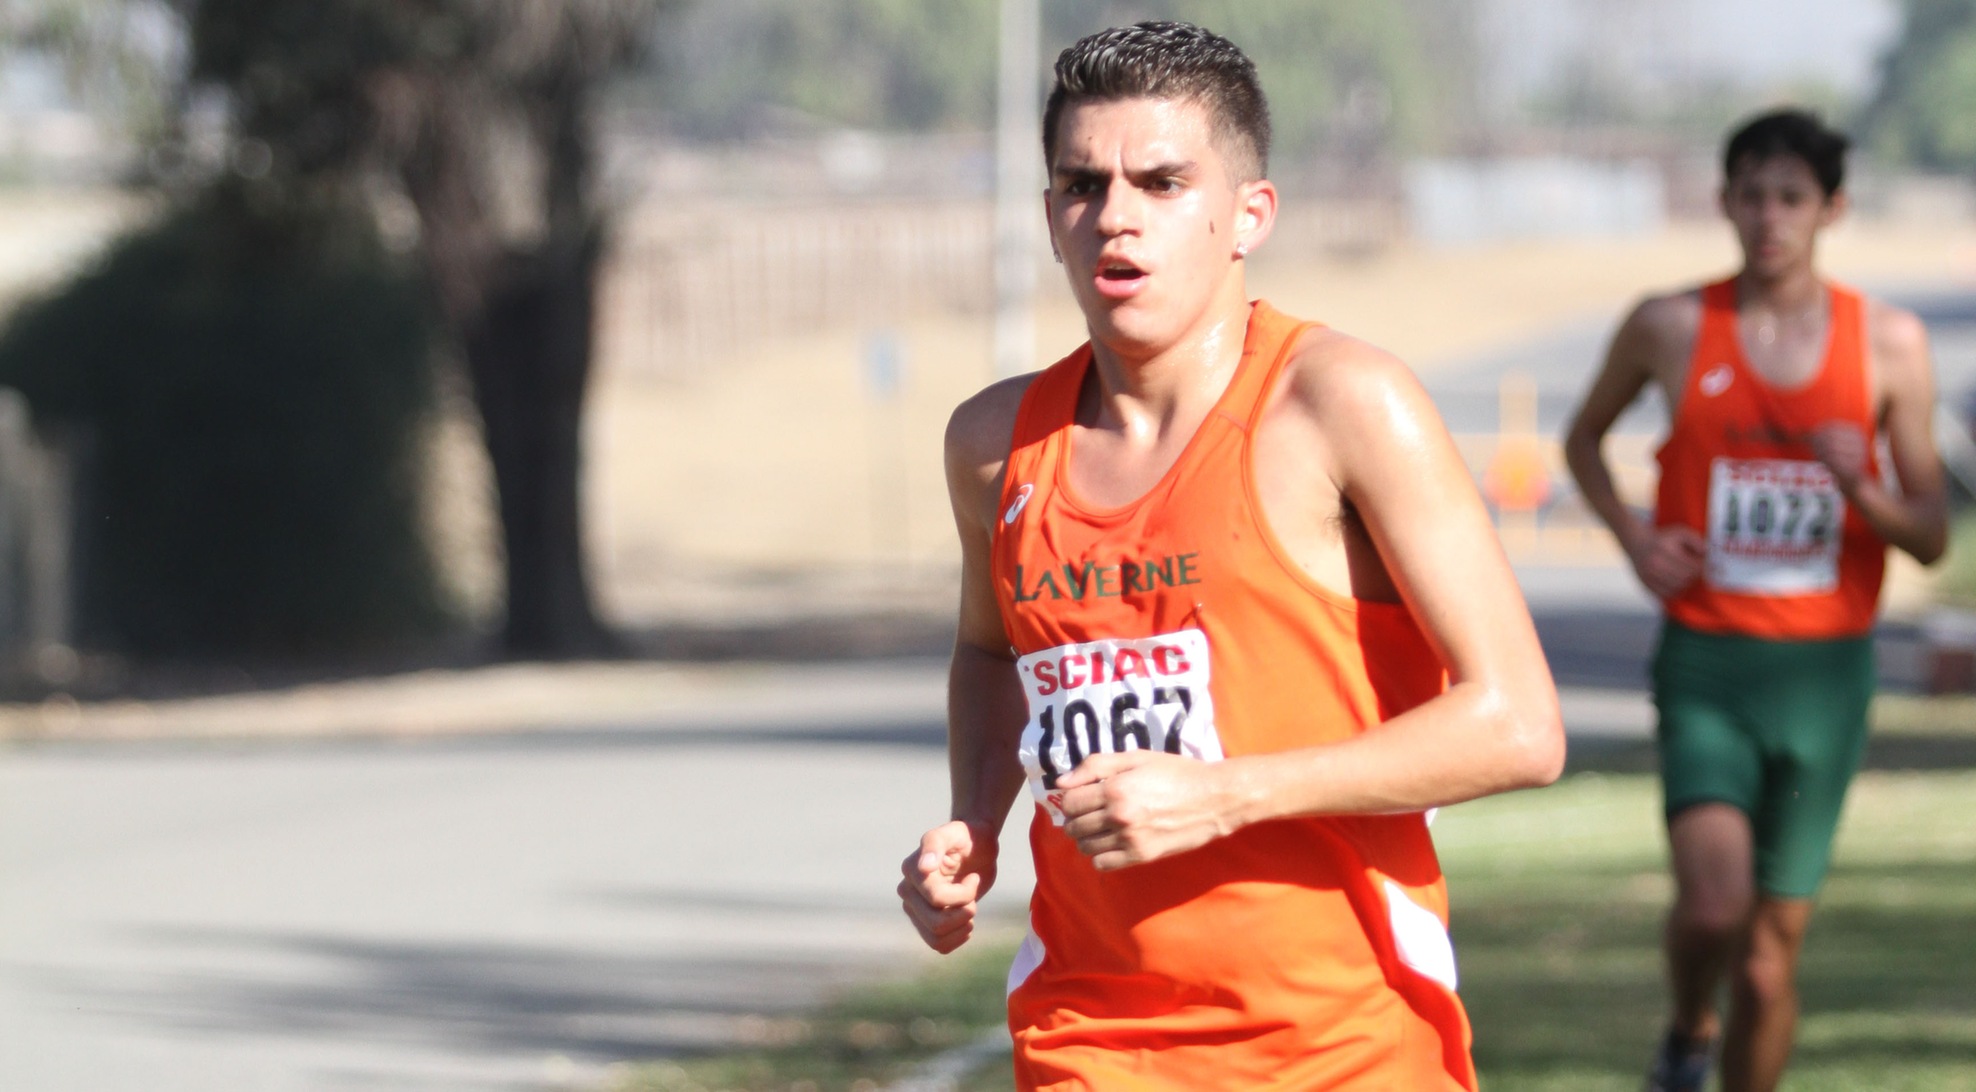 Johnny leads Leopards at SCIAC Championships